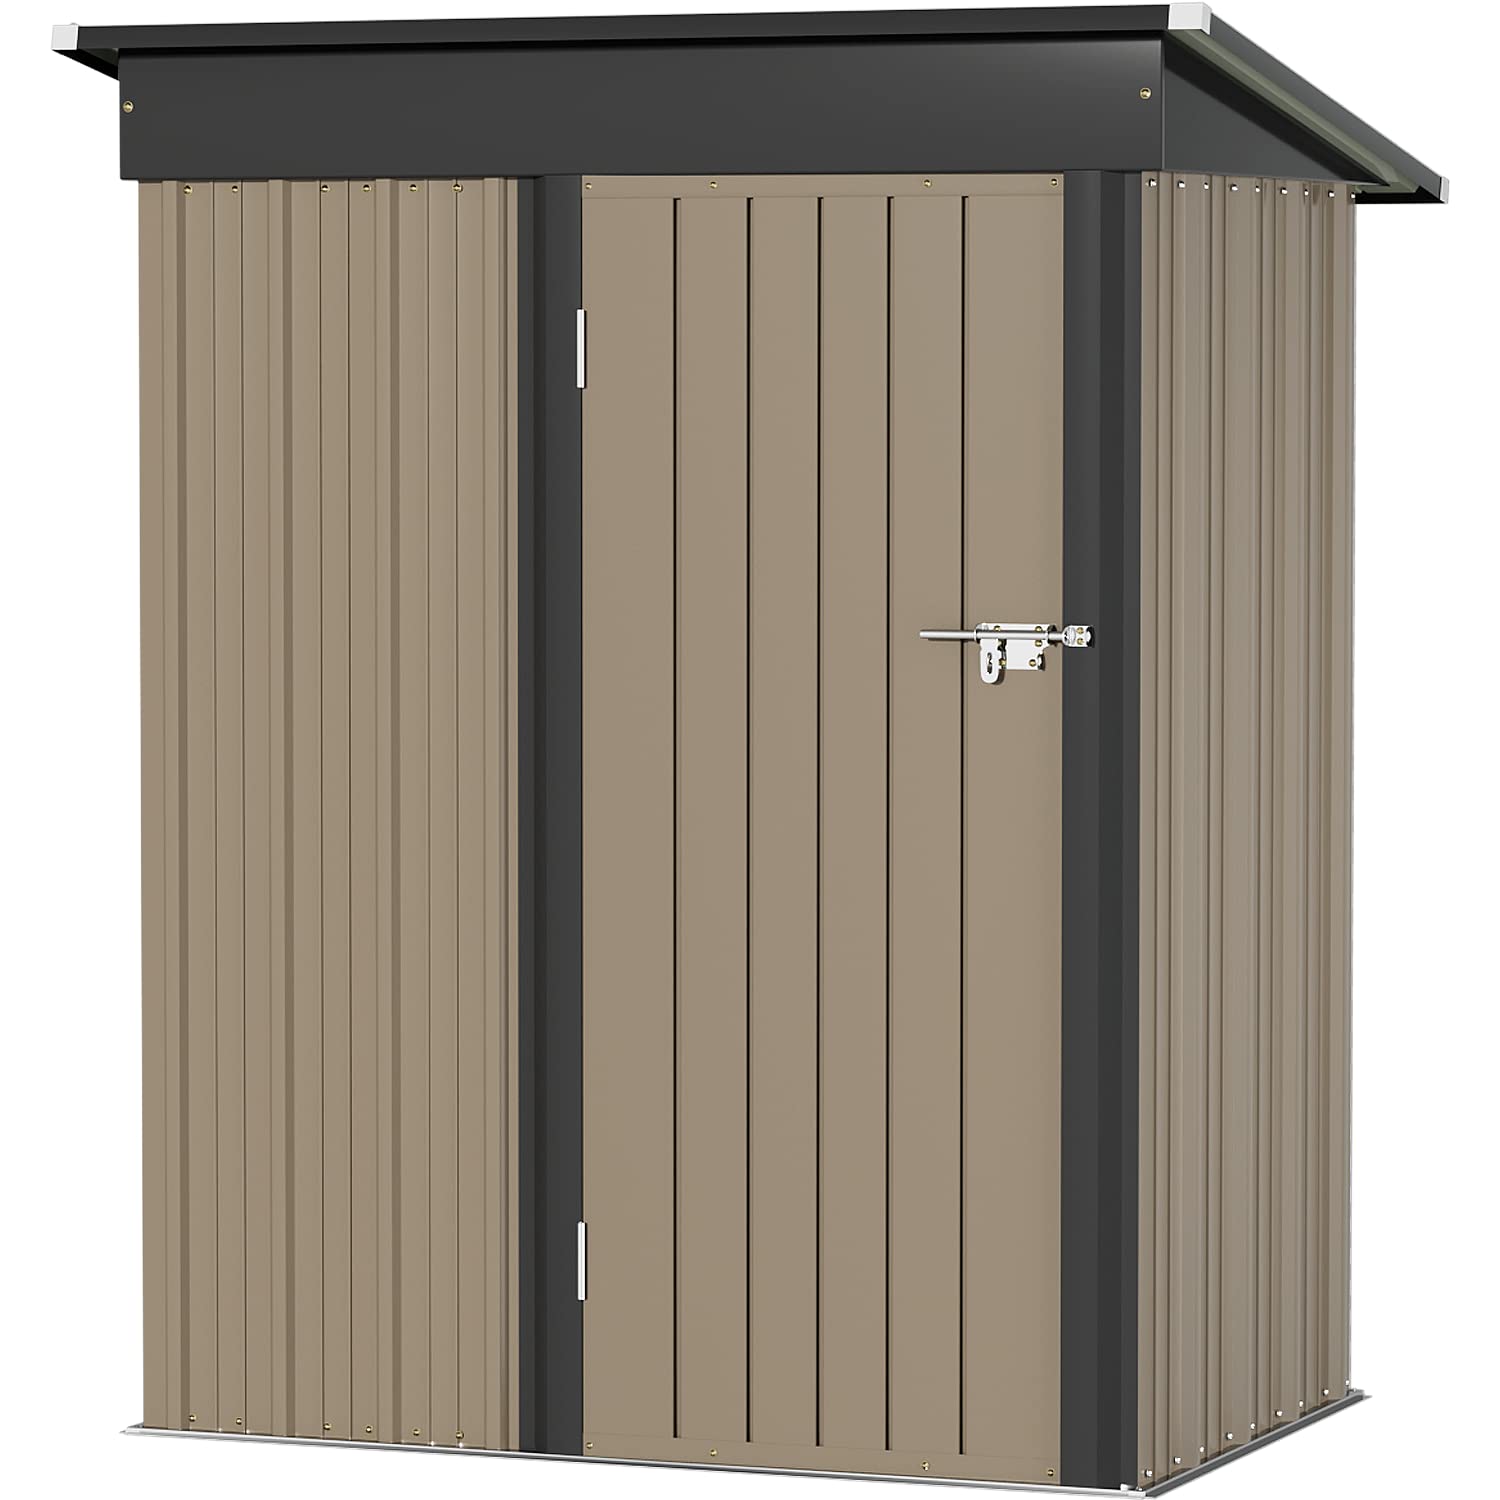 Greesum Metal Outdoor Storage Shed 5Ft X 3Ft, Steel Utility Tool Shed Storage House With Door & Lock, Metal Sheds Outdoor Storag